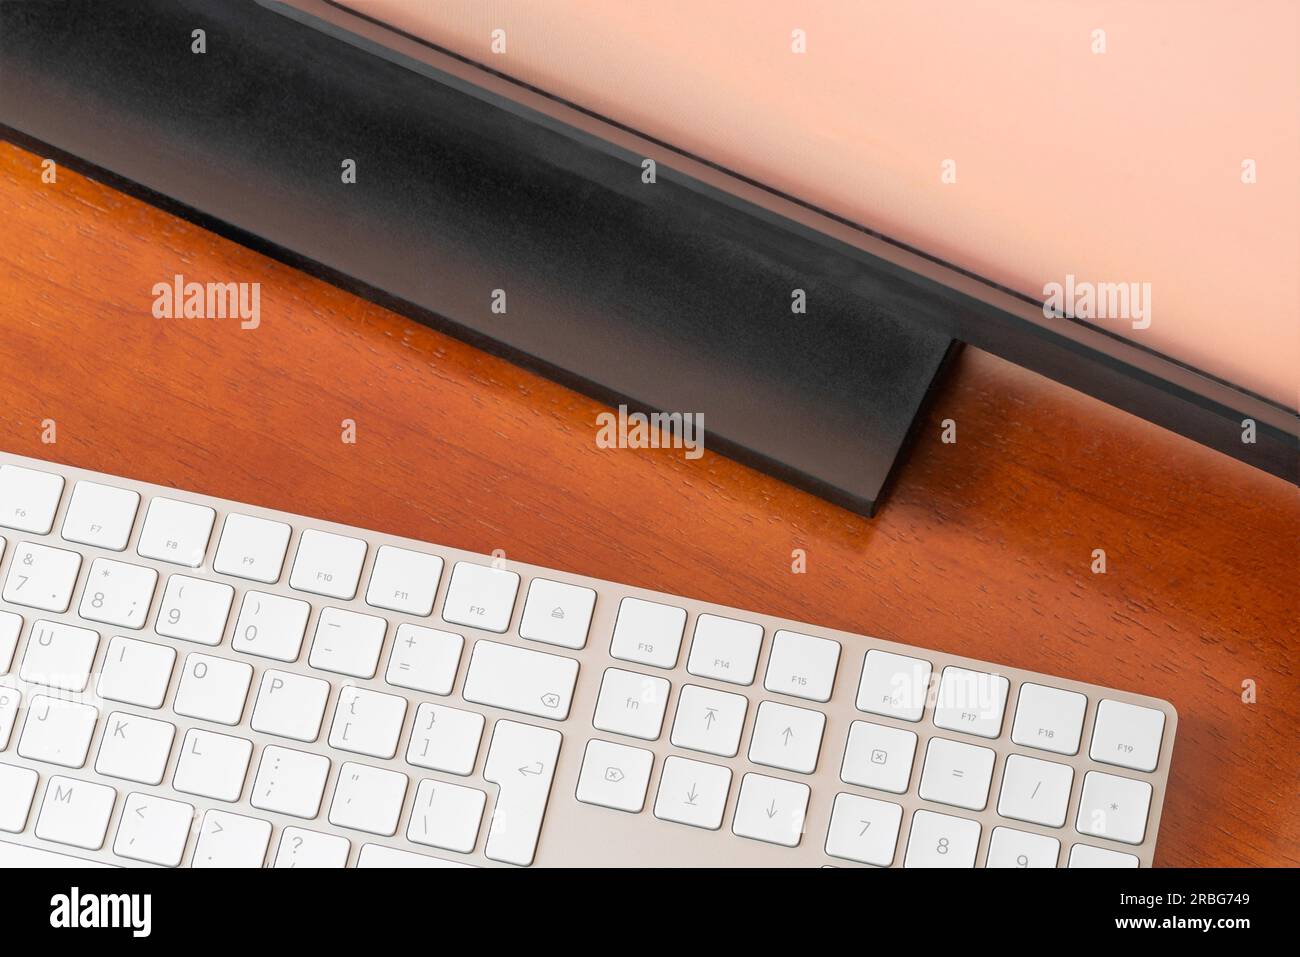 A computer monitor and a white digital wireless keyboard on a round wooden desk Stock Photo